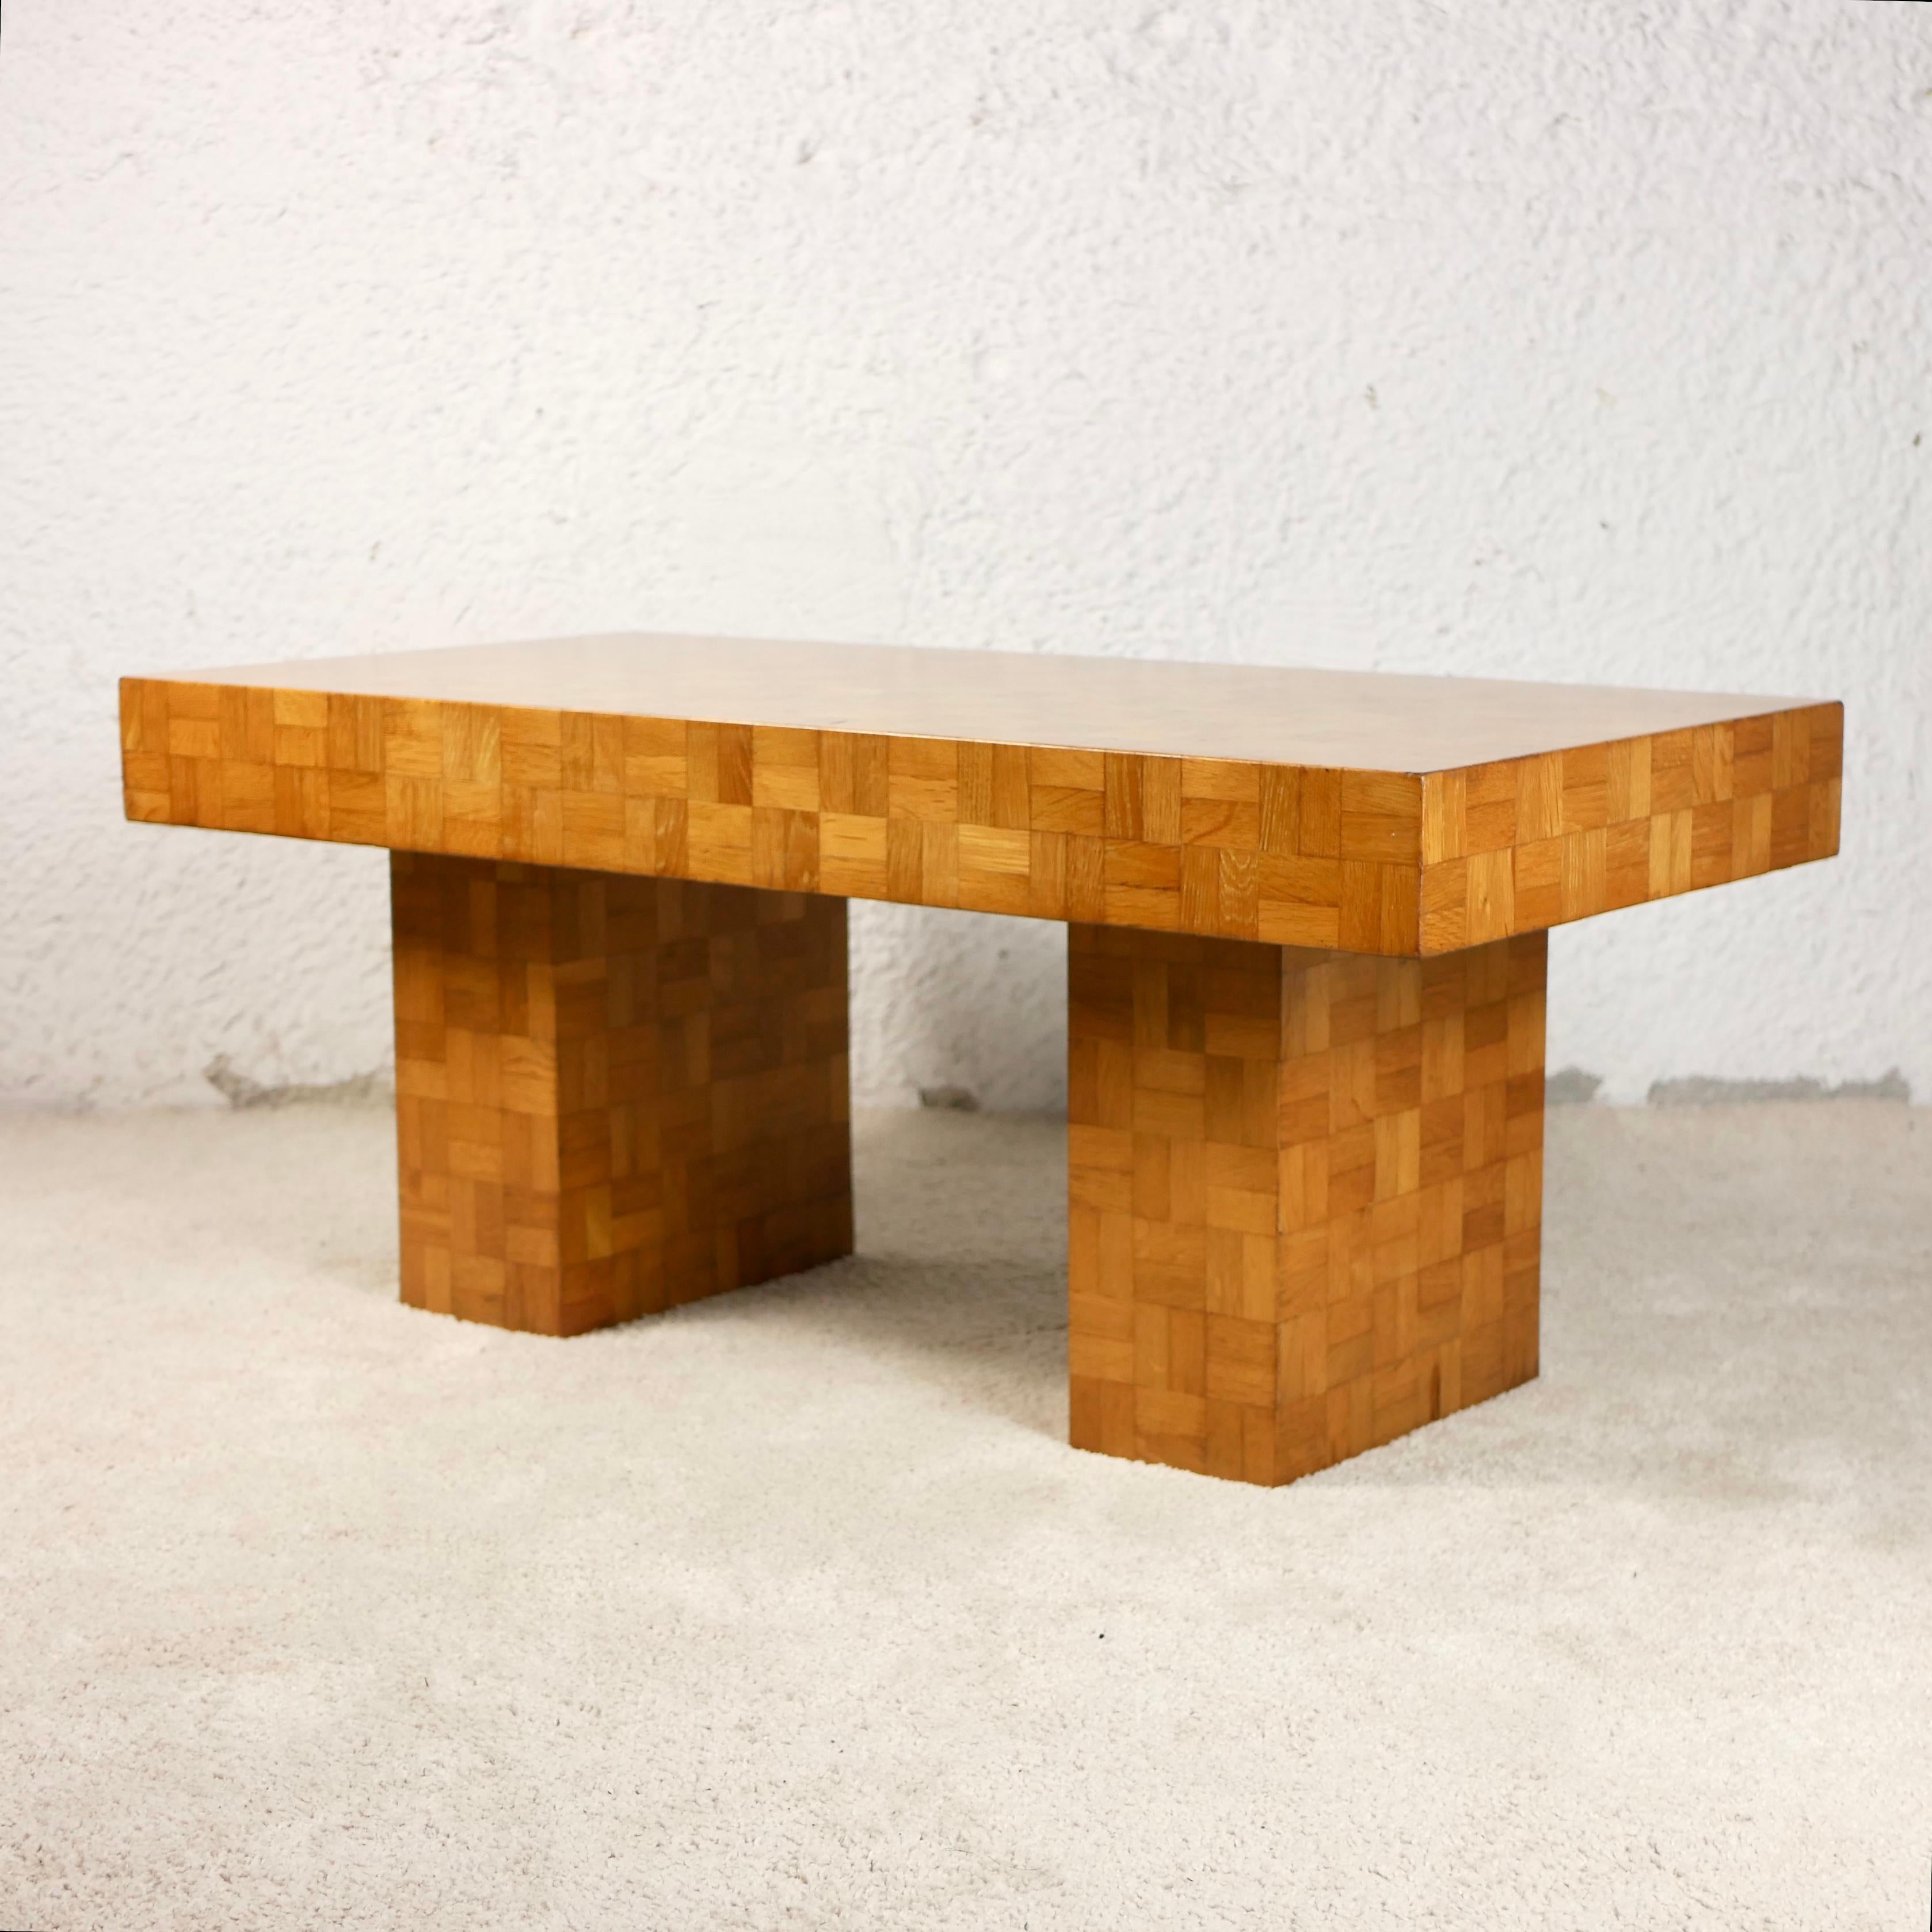 European Oak Wood Marquetry Coffee Table from the 1970s